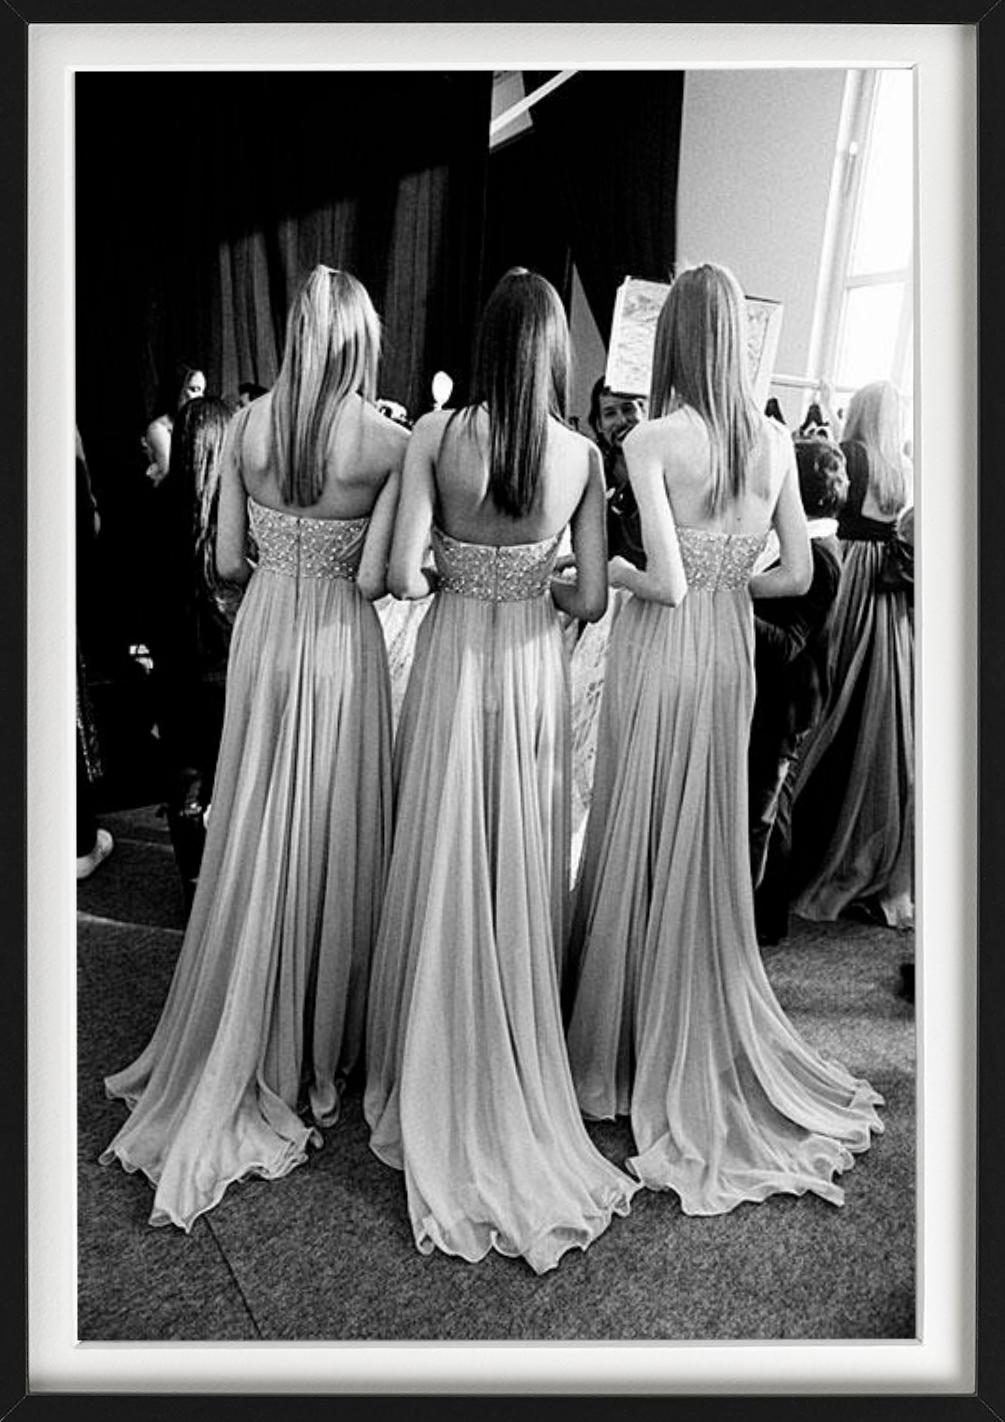 'Elie Saab Haute Couture' - three models in gowns, fine art photography, 2007 - Gray Figurative Photograph by Gérard Uféras